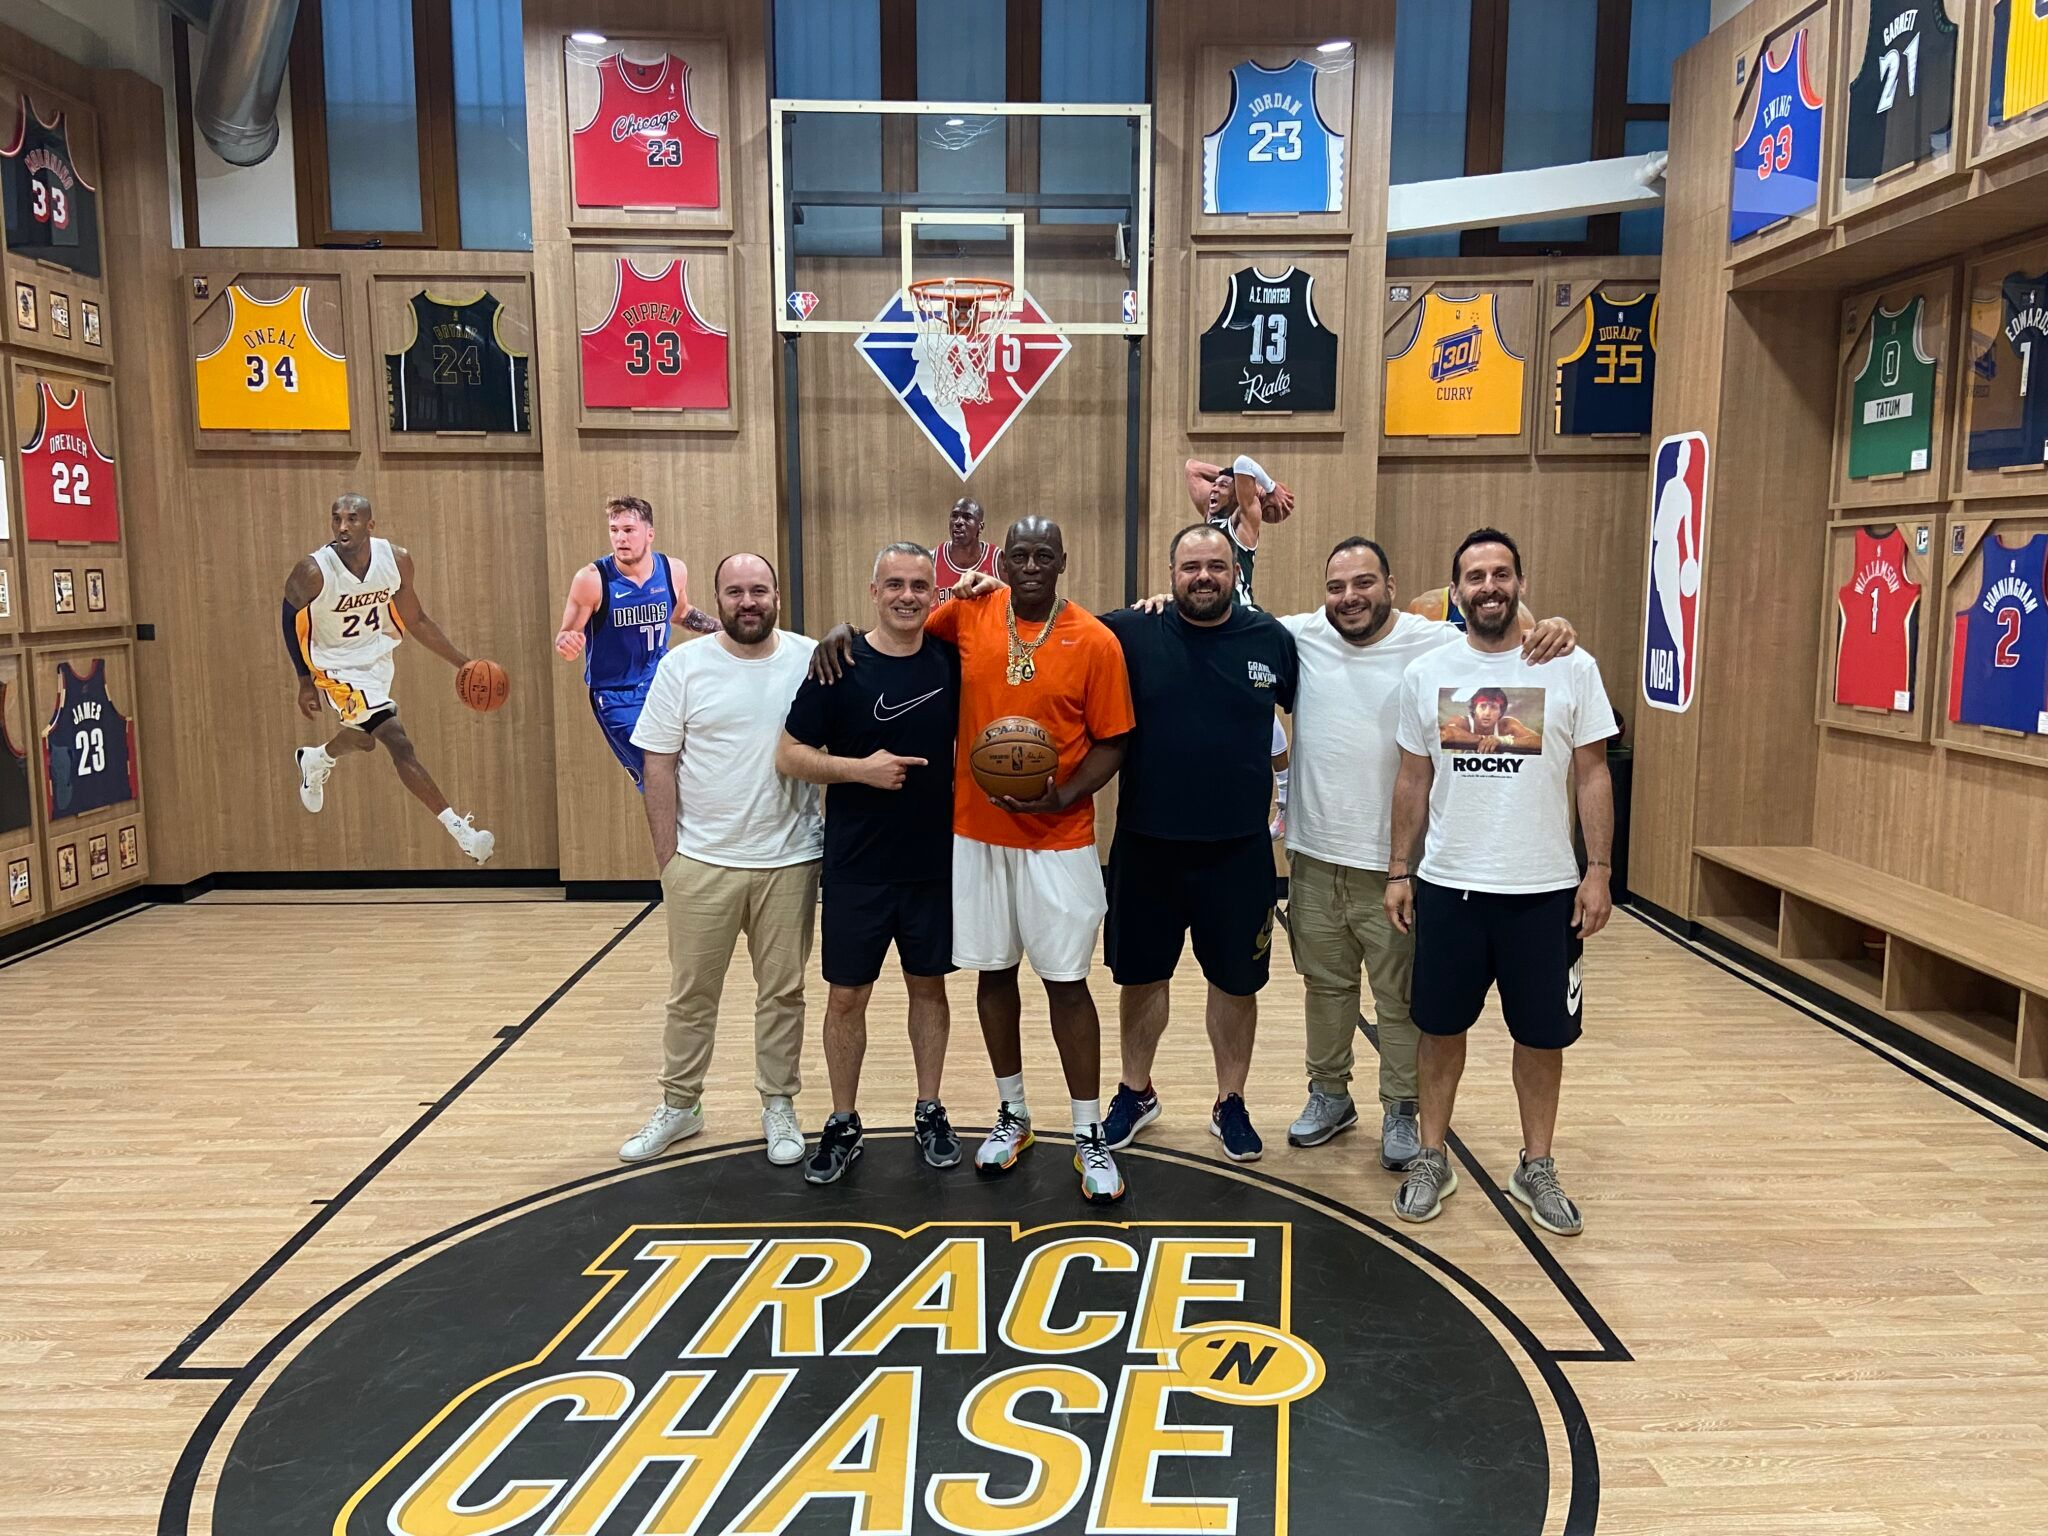 The Trace ‘n Chase team spends a casual Friday evening with former Greek League superstar David Ancrum!